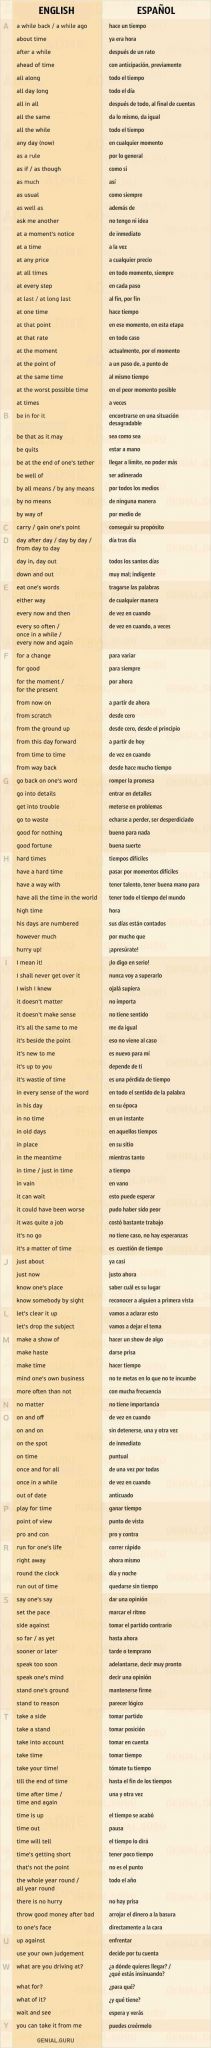 Adverb Practice Worksheets Along with 222 Best Practice Worksheets Images On Pinterest